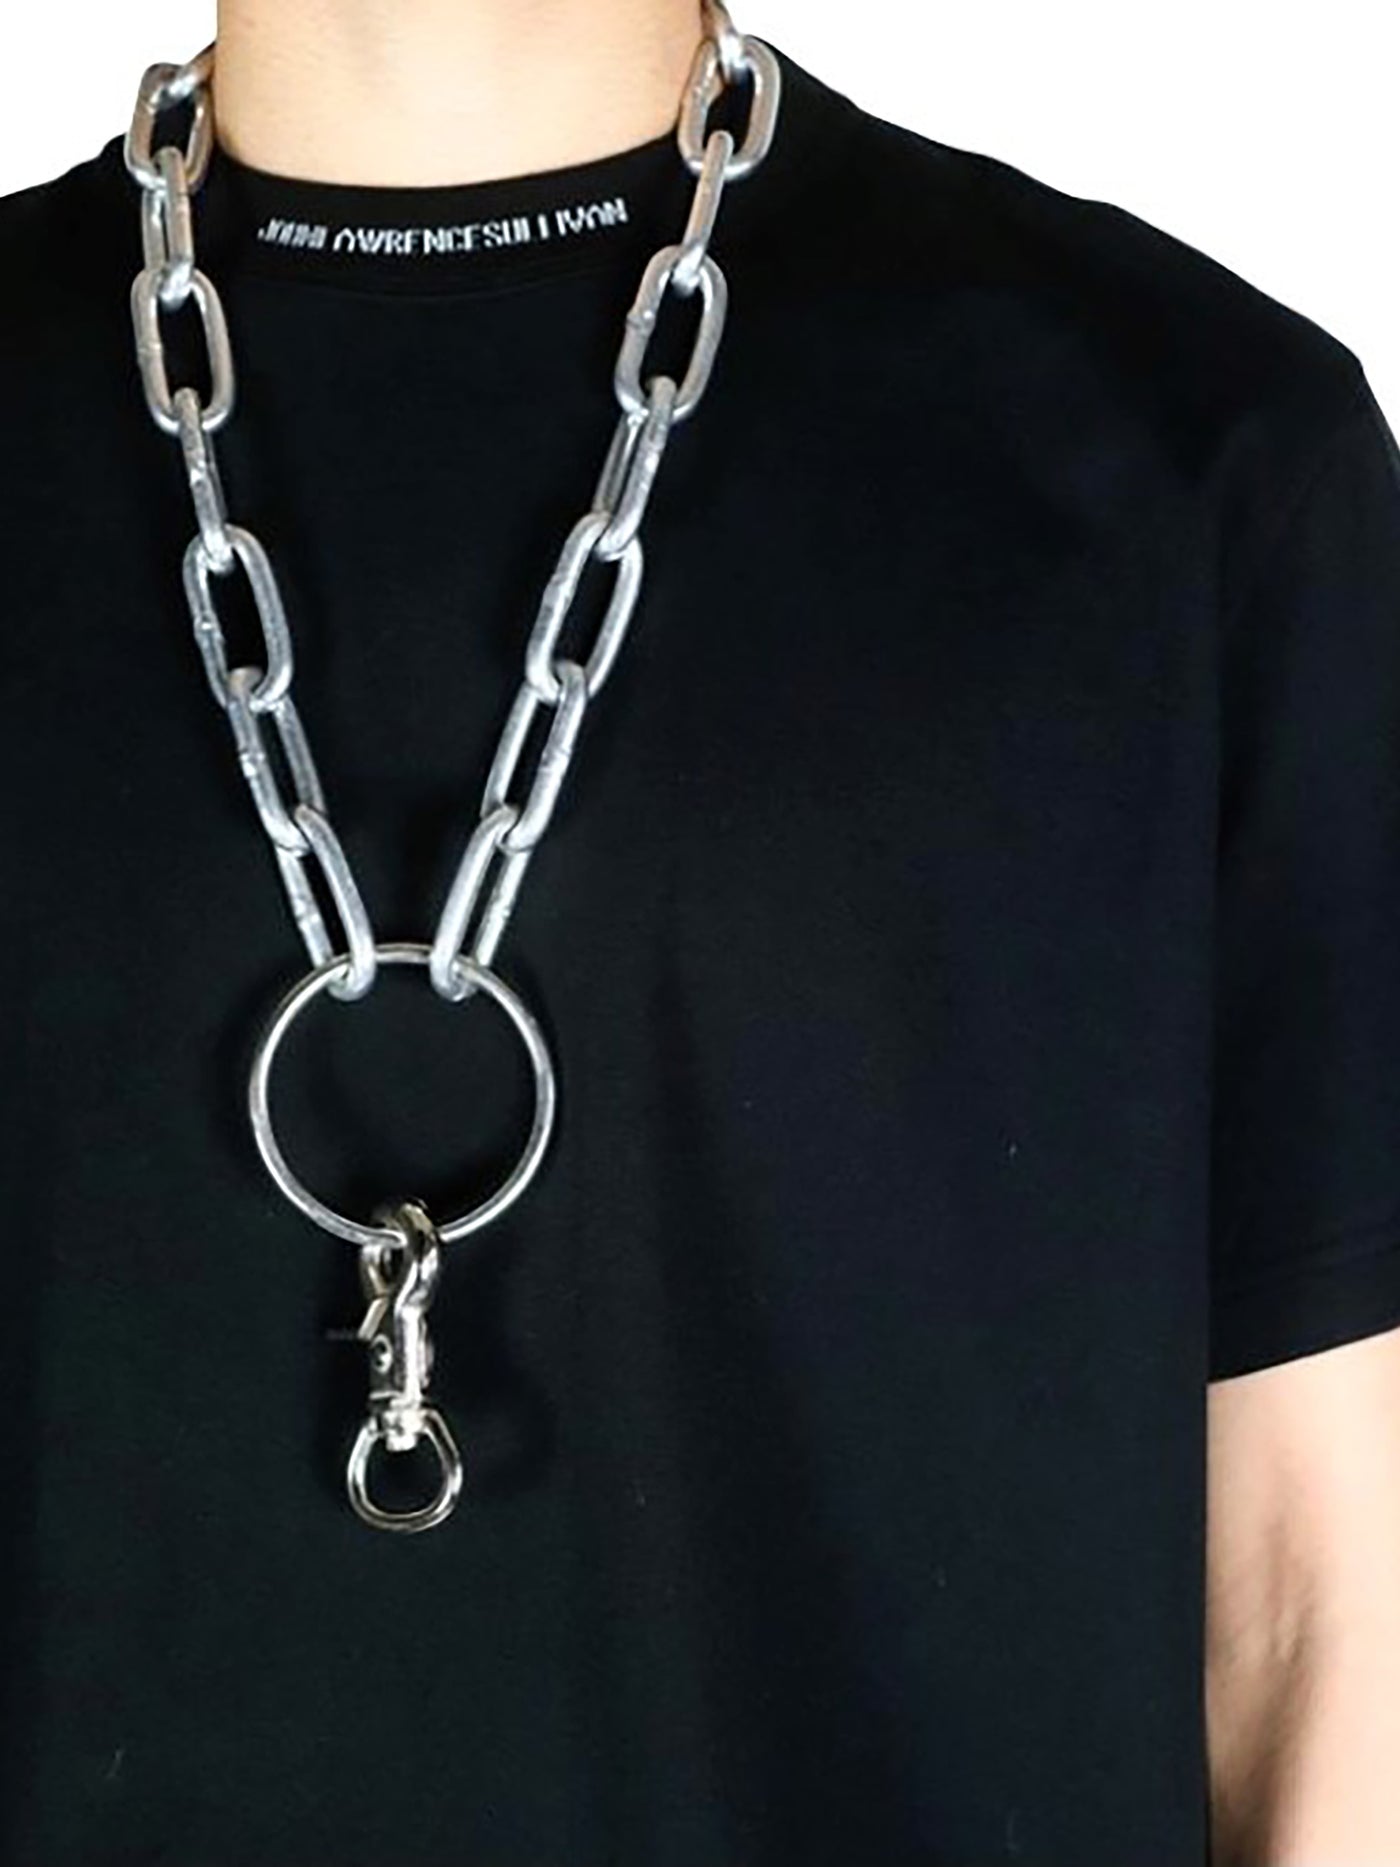 Big chain necklace